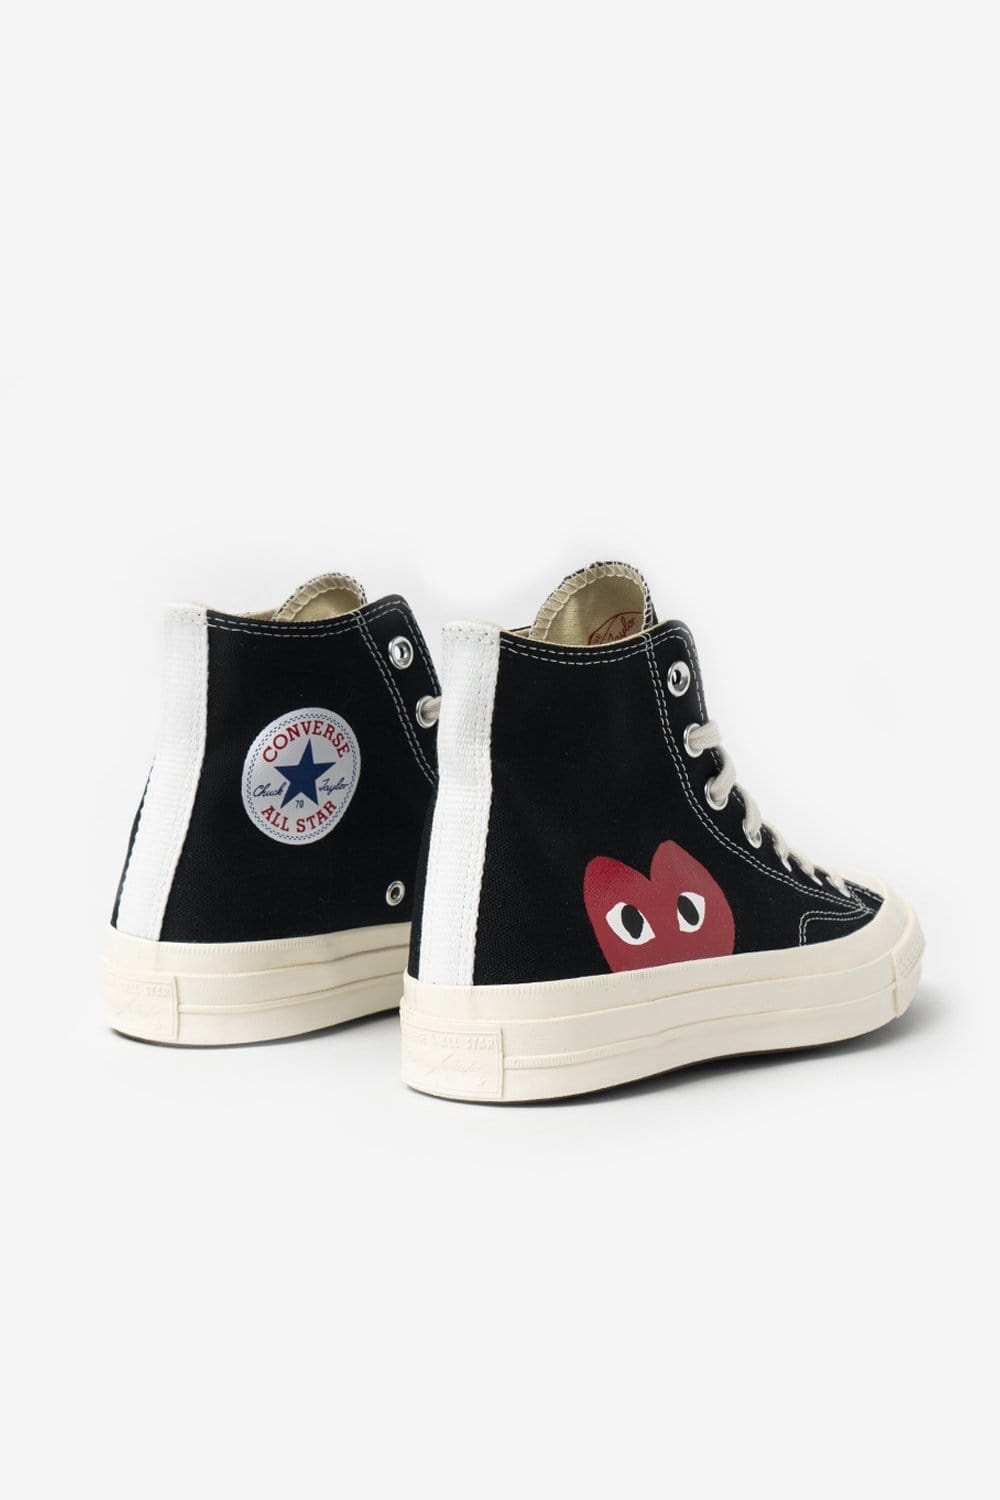 fire Hummingbird Pinpoint COMME des GARCONS PLAY Converse Chuck Taylor All Star '70 Hi (Black) -  Commonwealth